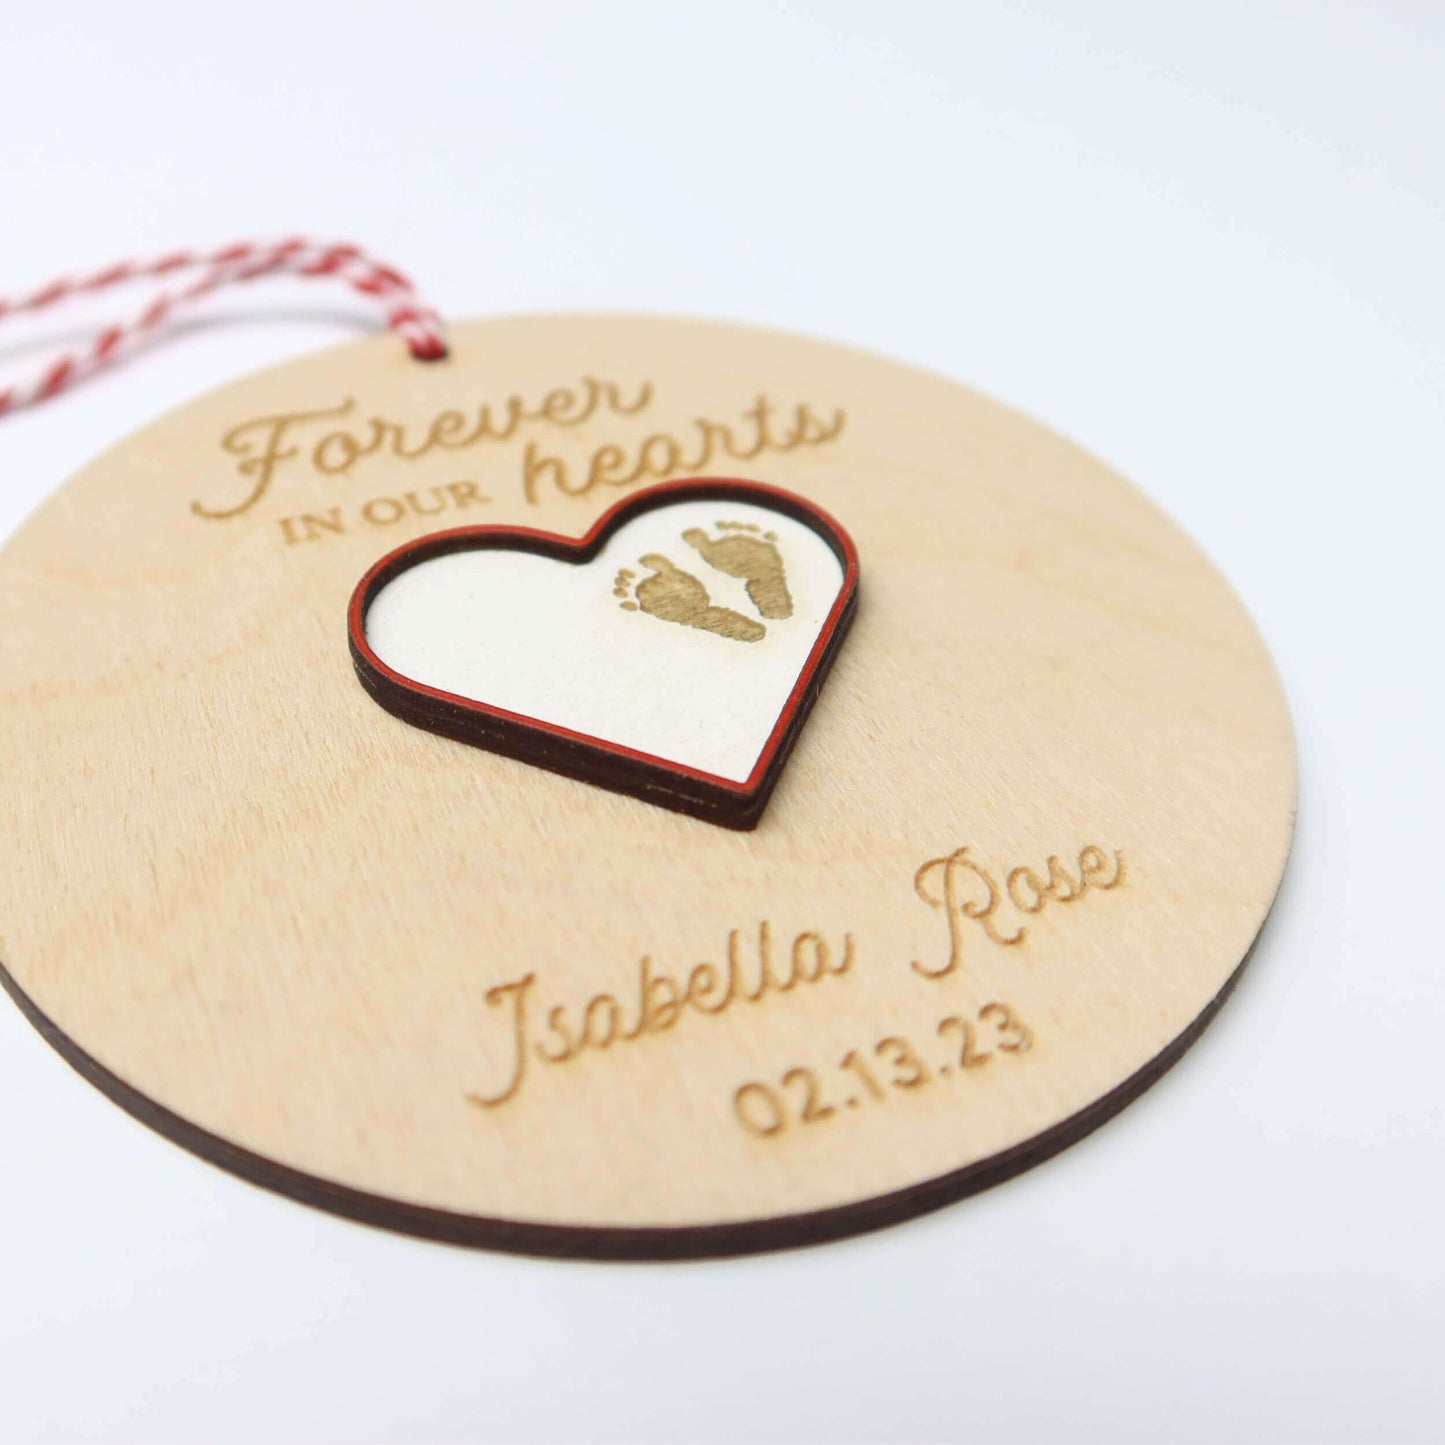 Forever in Our Hearts Baby Memorial Keepsake Ornament - Holiday Ornaments - Moon Rock Prints